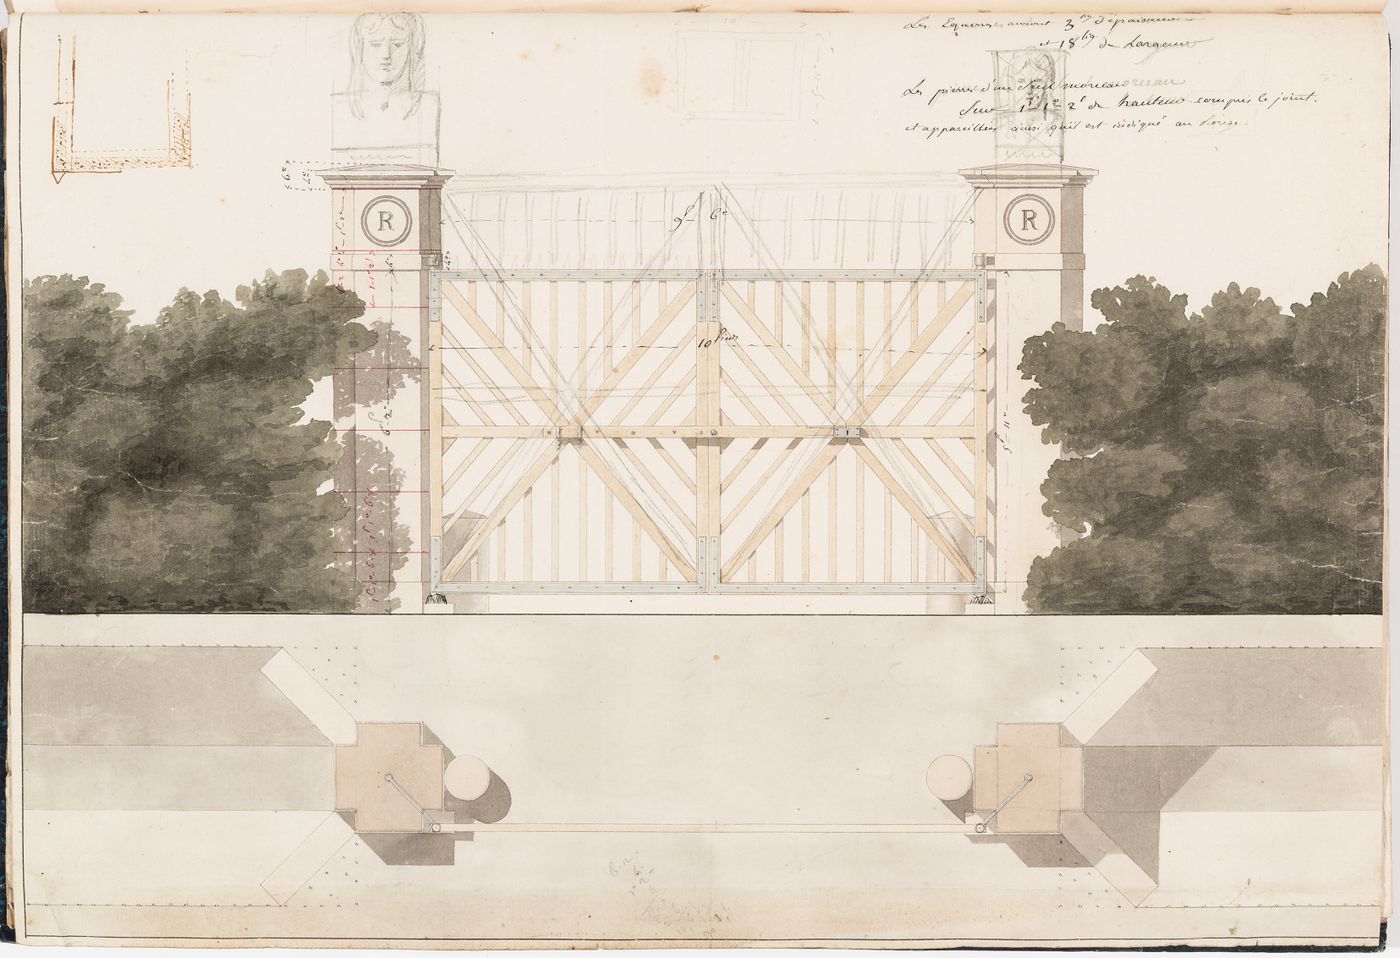 Elevation and plan for a gate, probably for Domaine de La Vallée